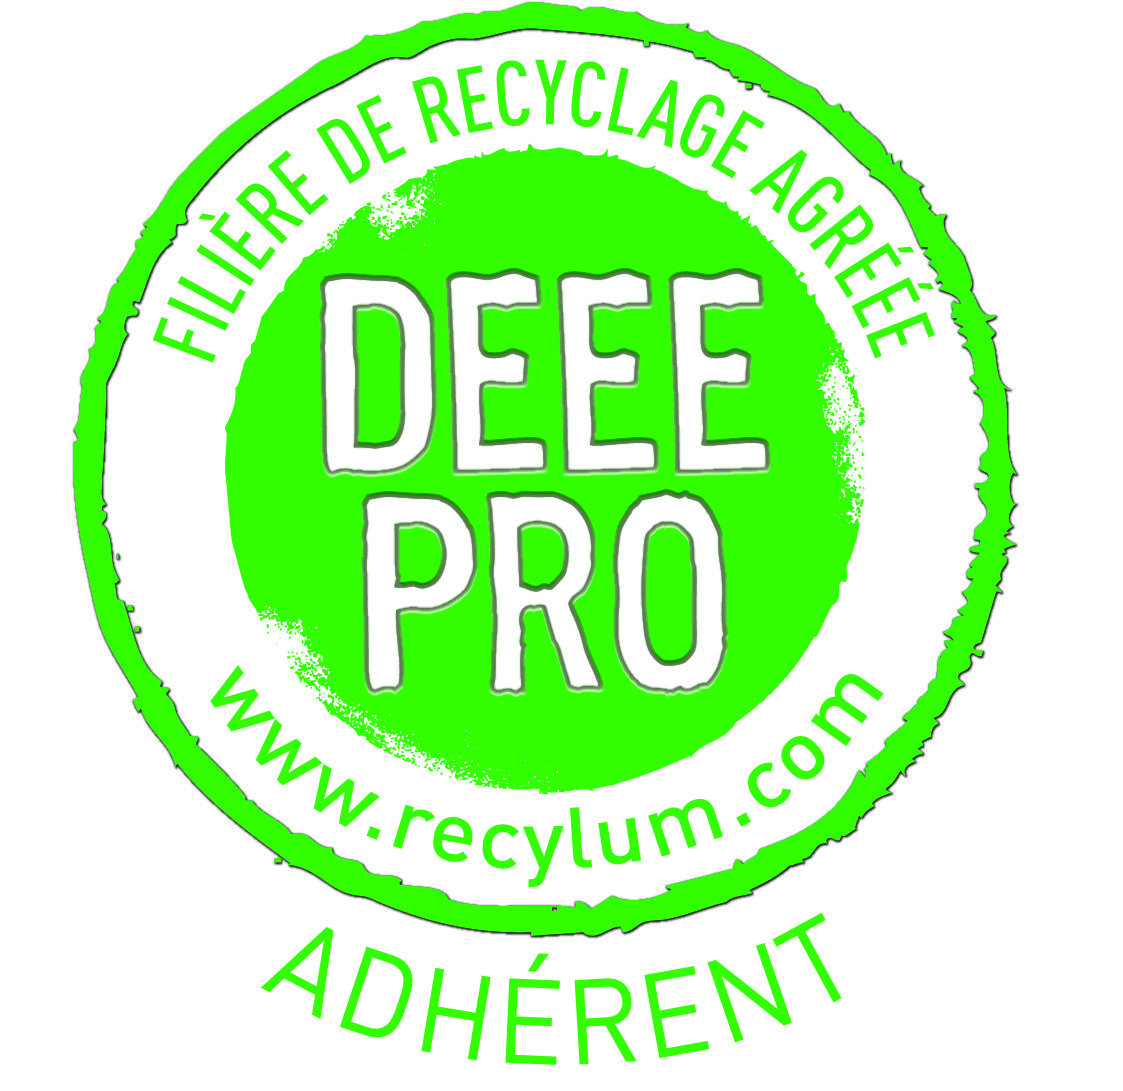 AOIP recycle vos instruments - Logo DEEE pro adhérent - AOIP